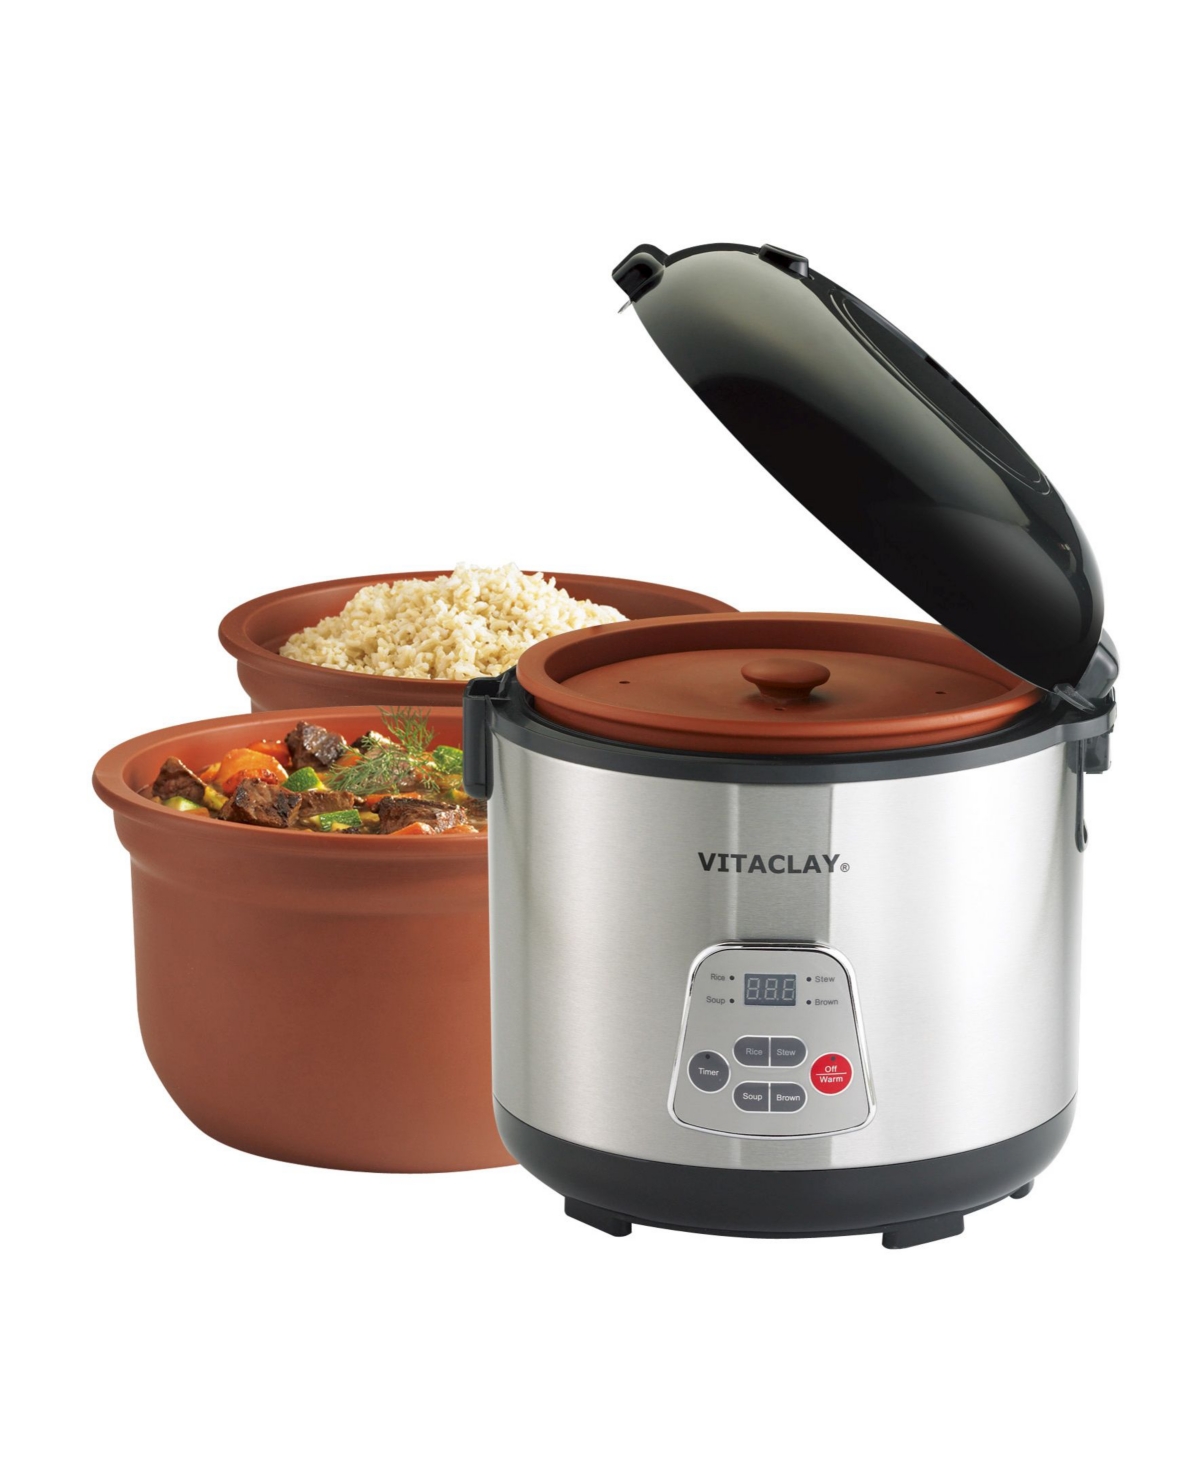 2 in 1 Clay Rice and Slow Cooker, 3.2 Qt - Silver